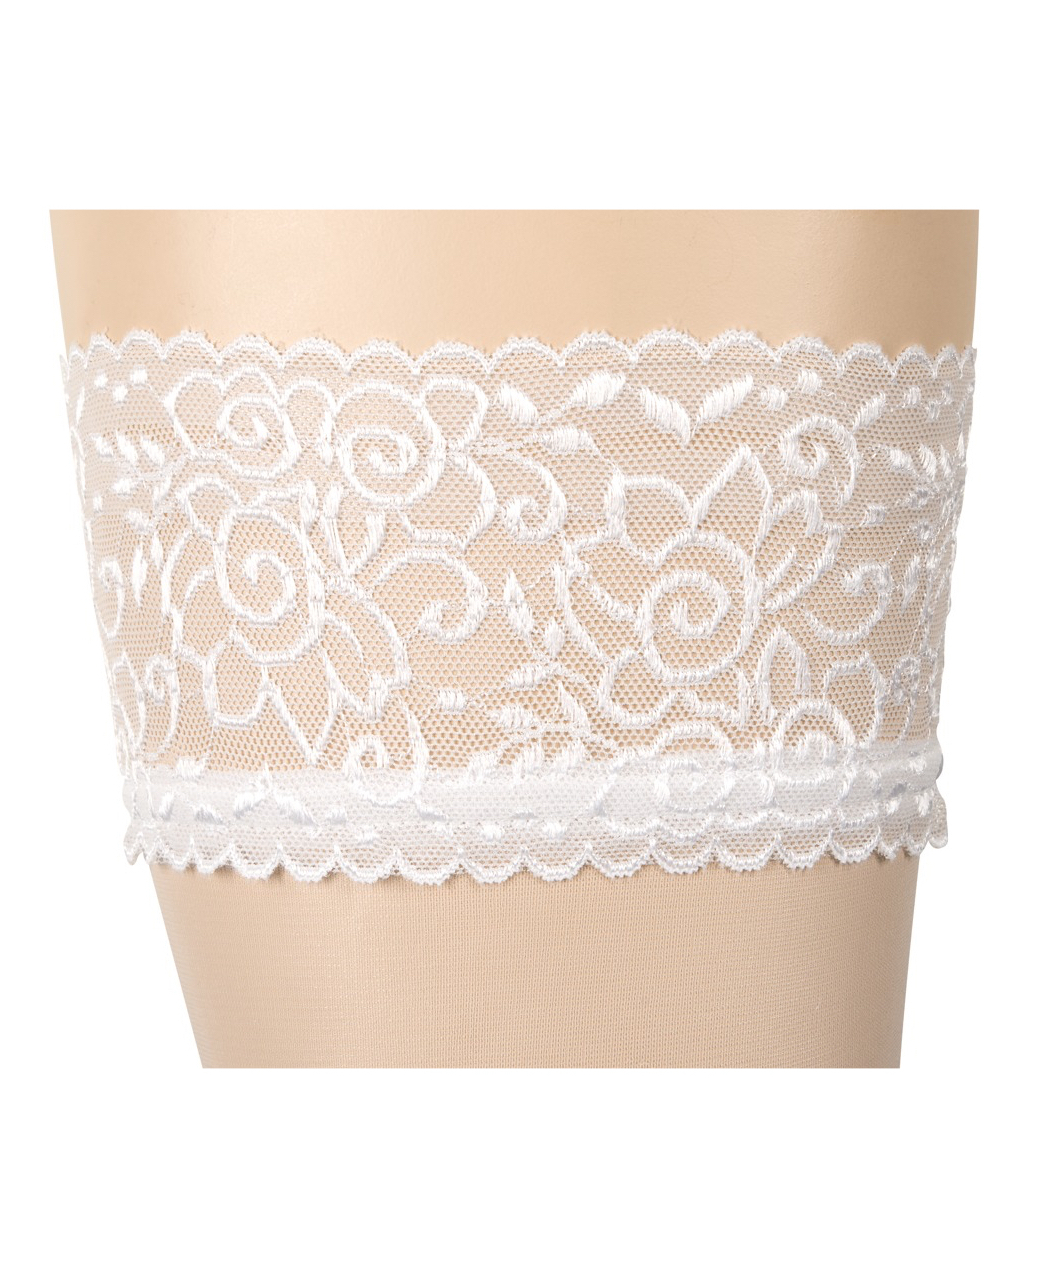 Cottelli Lingerie white hold-up stockings with lace